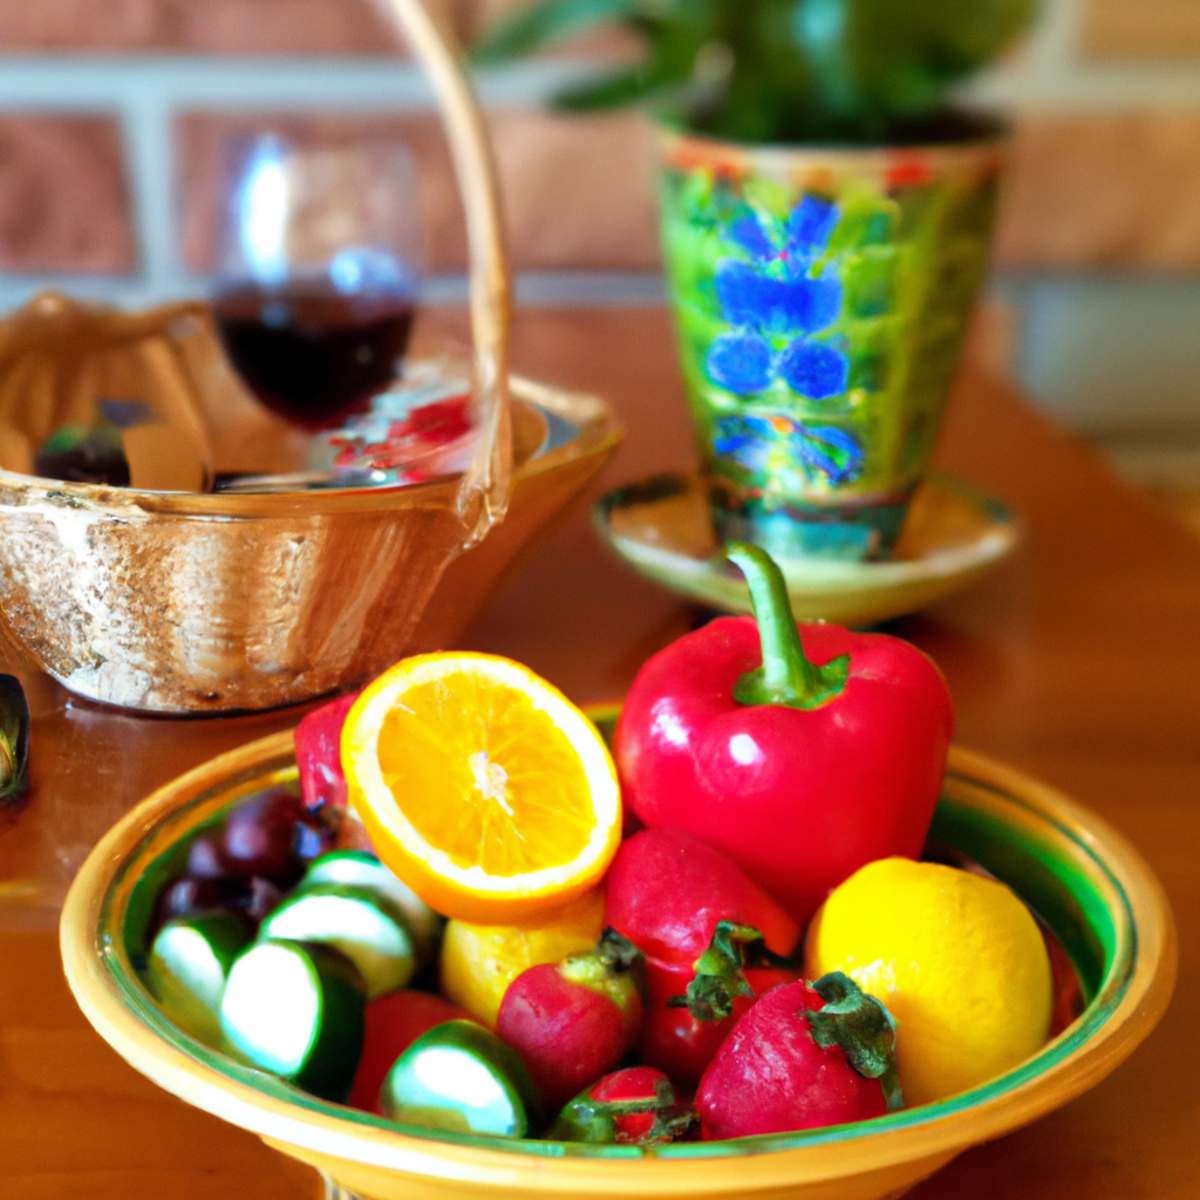 The photo features a wooden table with a plate of colorful fruits, including sliced oranges, strawberries, and grapes. Next to the plate is a glass of red wine and a small bowl of olives. In the background, there is a basket of fresh vegetables, such as tomatoes, cucumbers, and bell peppers. The natural lighting highlights the vibrant colors of the food, making it look appetizing and healthy. The composition of the photo suggests a balanced and nutritious meal, which is a key component of the Mediterranean diet.